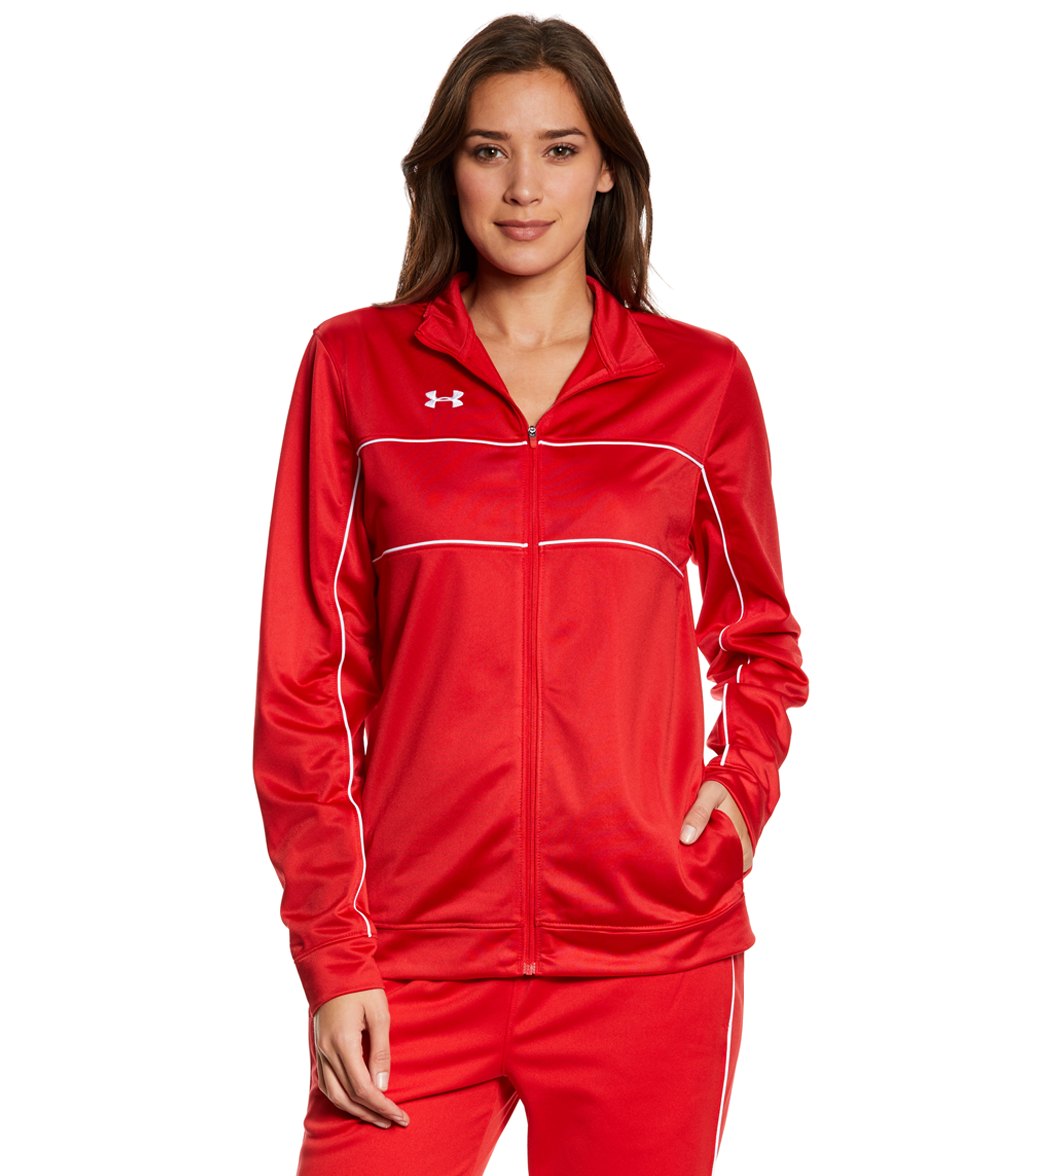 Under Armour Women's Rival Knit Warm-Up Jacket - Red/White Large Polyester - Swimoutlet.com